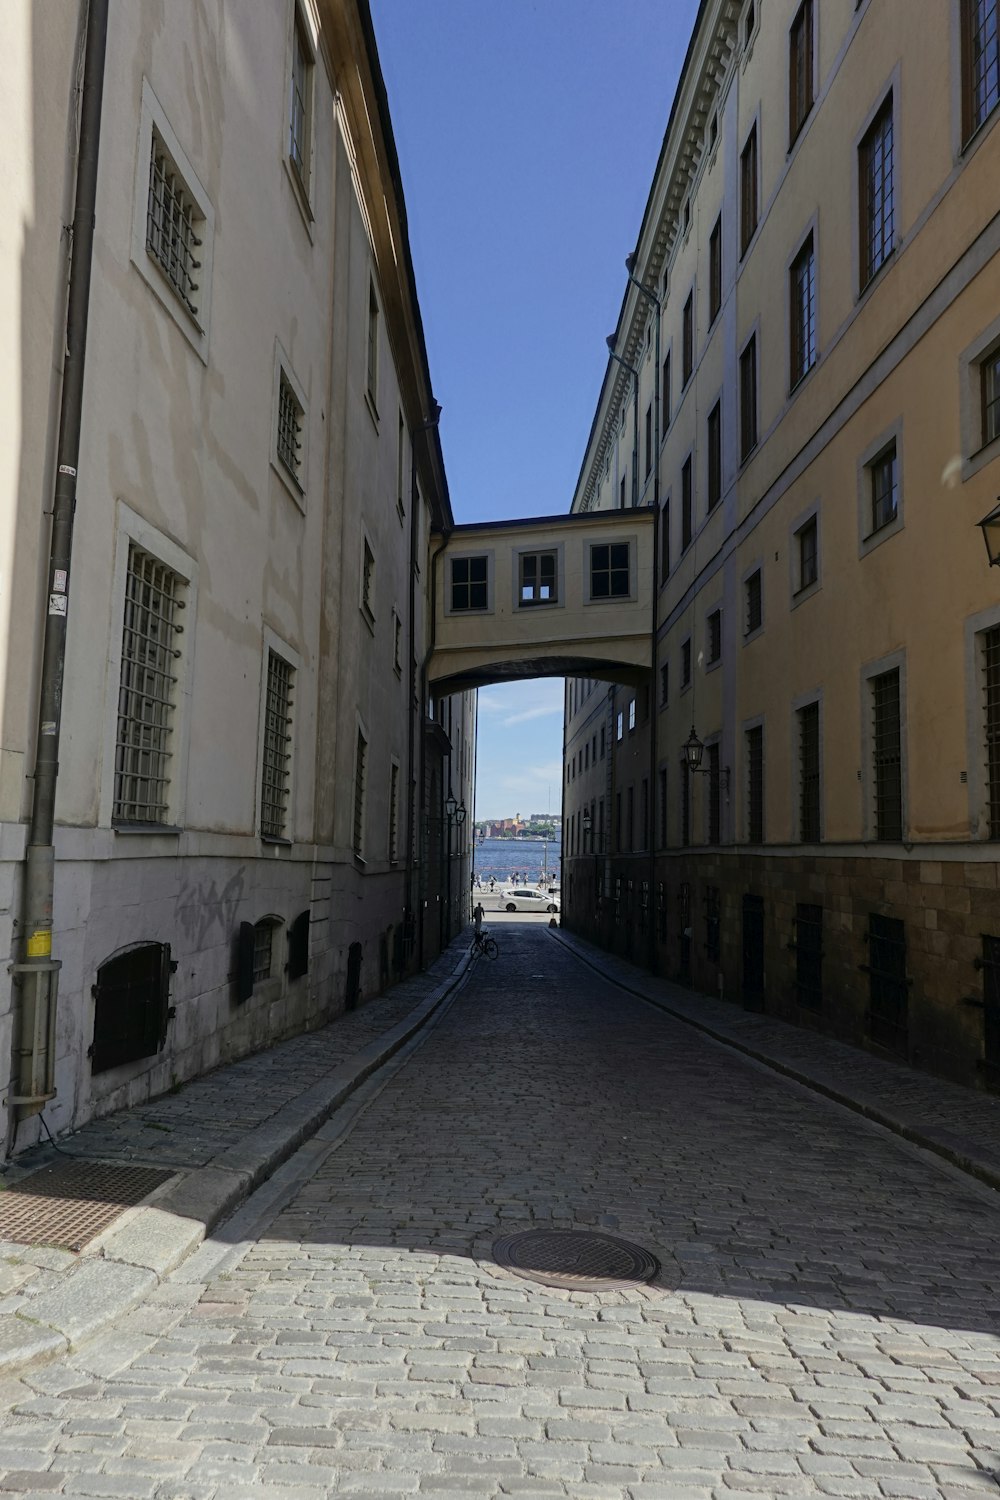 a view of a street with a bridge over it